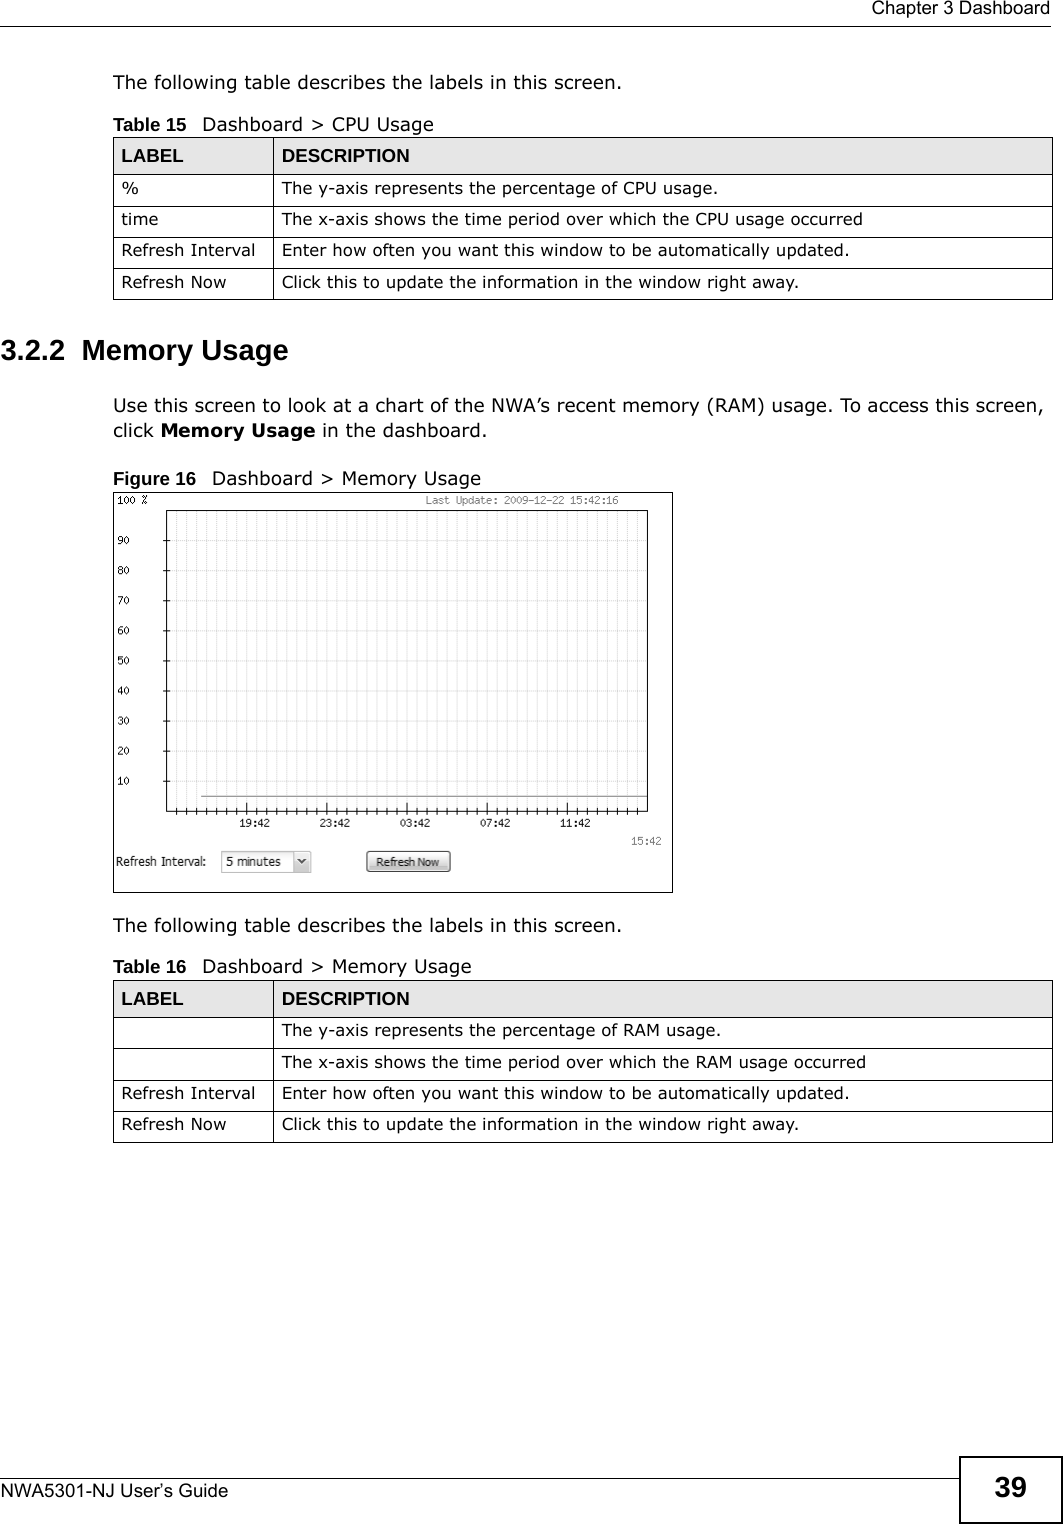  Chapter 3 DashboardNWA5301-NJ User’s Guide 39The following table describes the labels in this screen.  3.2.2  Memory UsageUse this screen to look at a chart of the NWA’s recent memory (RAM) usage. To access this screen, click Memory Usage in the dashboard.Figure 16   Dashboard &gt; Memory UsageThe following table describes the labels in this screen.  Table 15   Dashboard &gt; CPU UsageLABEL DESCRIPTION% The y-axis represents the percentage of CPU usage.time The x-axis shows the time period over which the CPU usage occurredRefresh Interval Enter how often you want this window to be automatically updated.Refresh Now Click this to update the information in the window right away. Table 16   Dashboard &gt; Memory UsageLABEL DESCRIPTIONThe y-axis represents the percentage of RAM usage.The x-axis shows the time period over which the RAM usage occurredRefresh Interval Enter how often you want this window to be automatically updated.Refresh Now Click this to update the information in the window right away. 